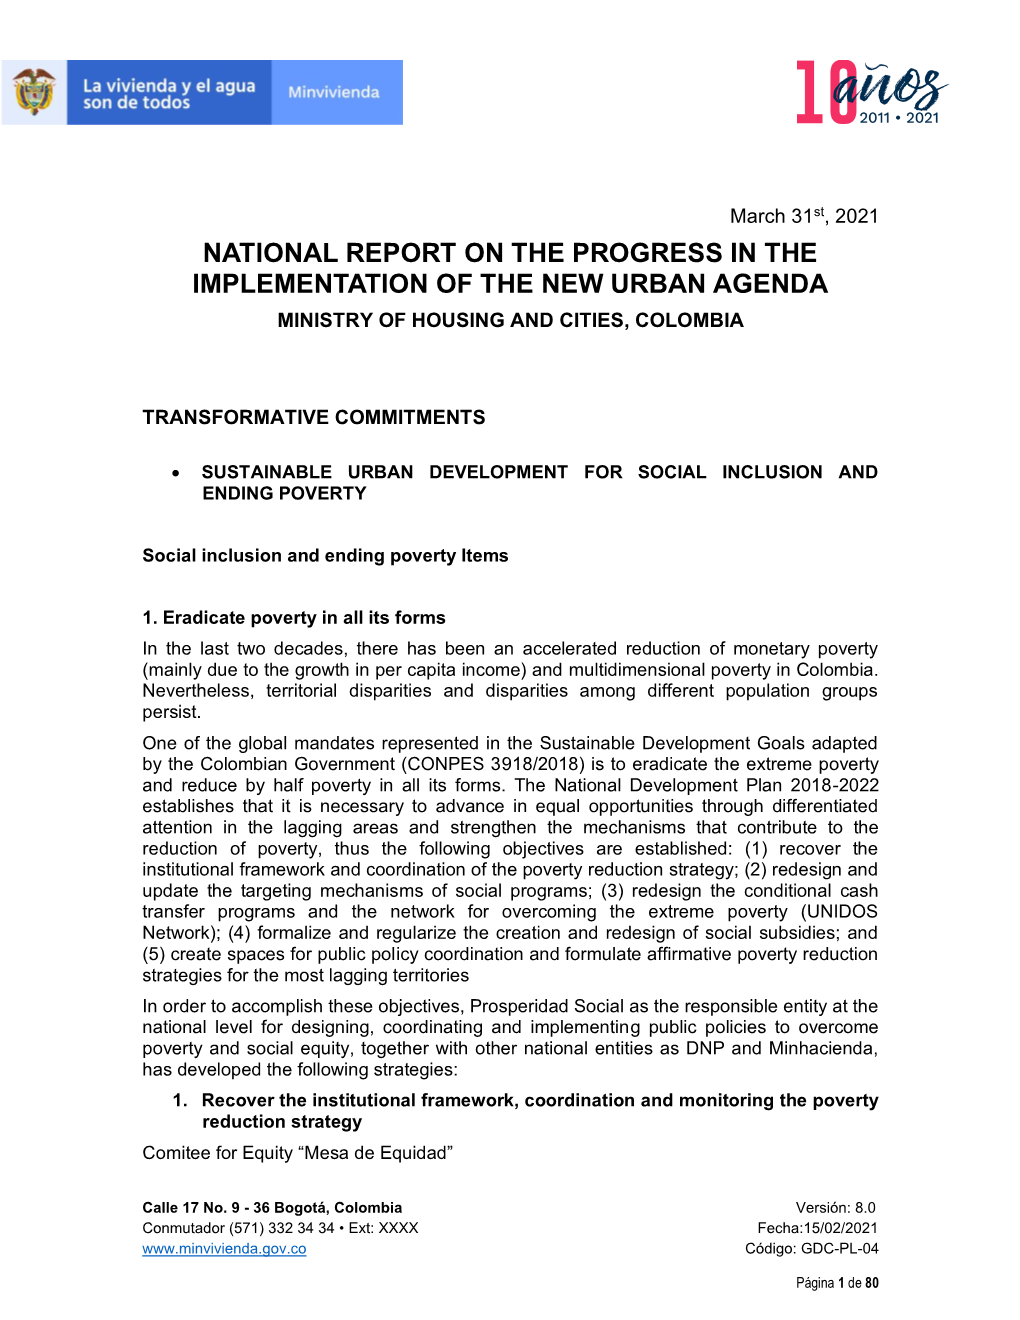 Republic of Colombia National Report Oct 2020